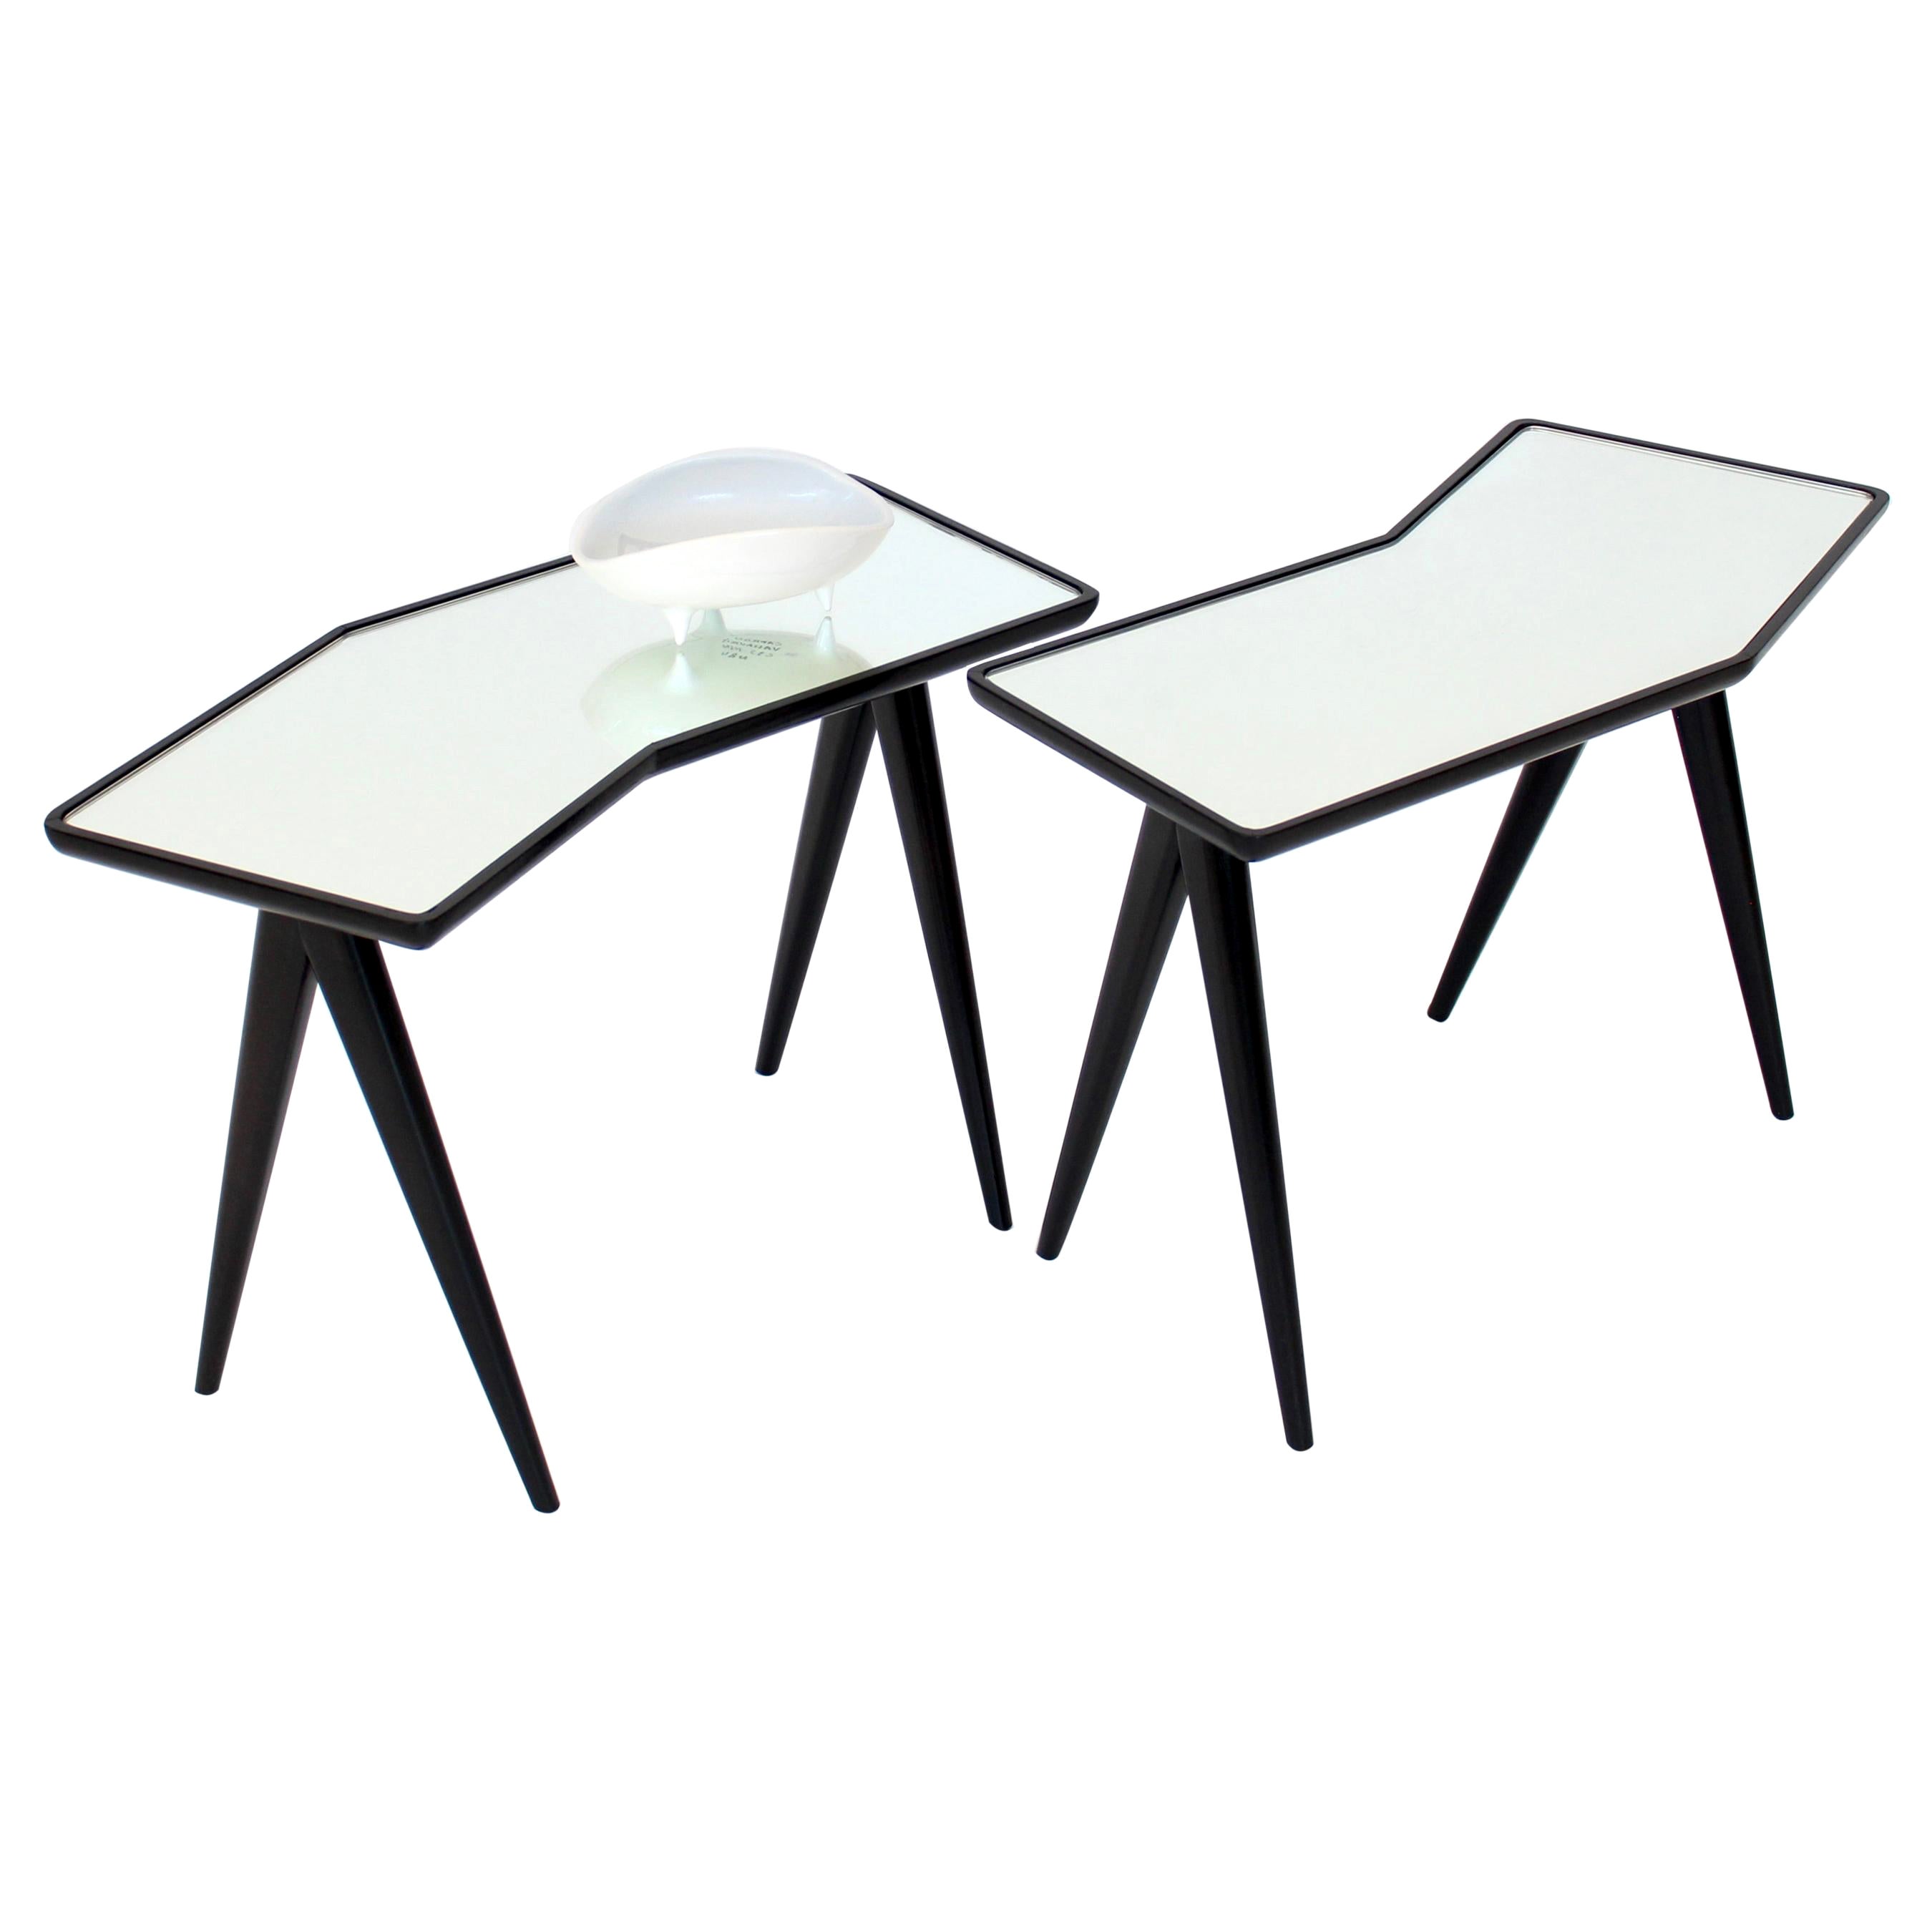 Gio Ponti Pair of Black Side Tables Mirrored Glass Tops Asymmetrical Forms